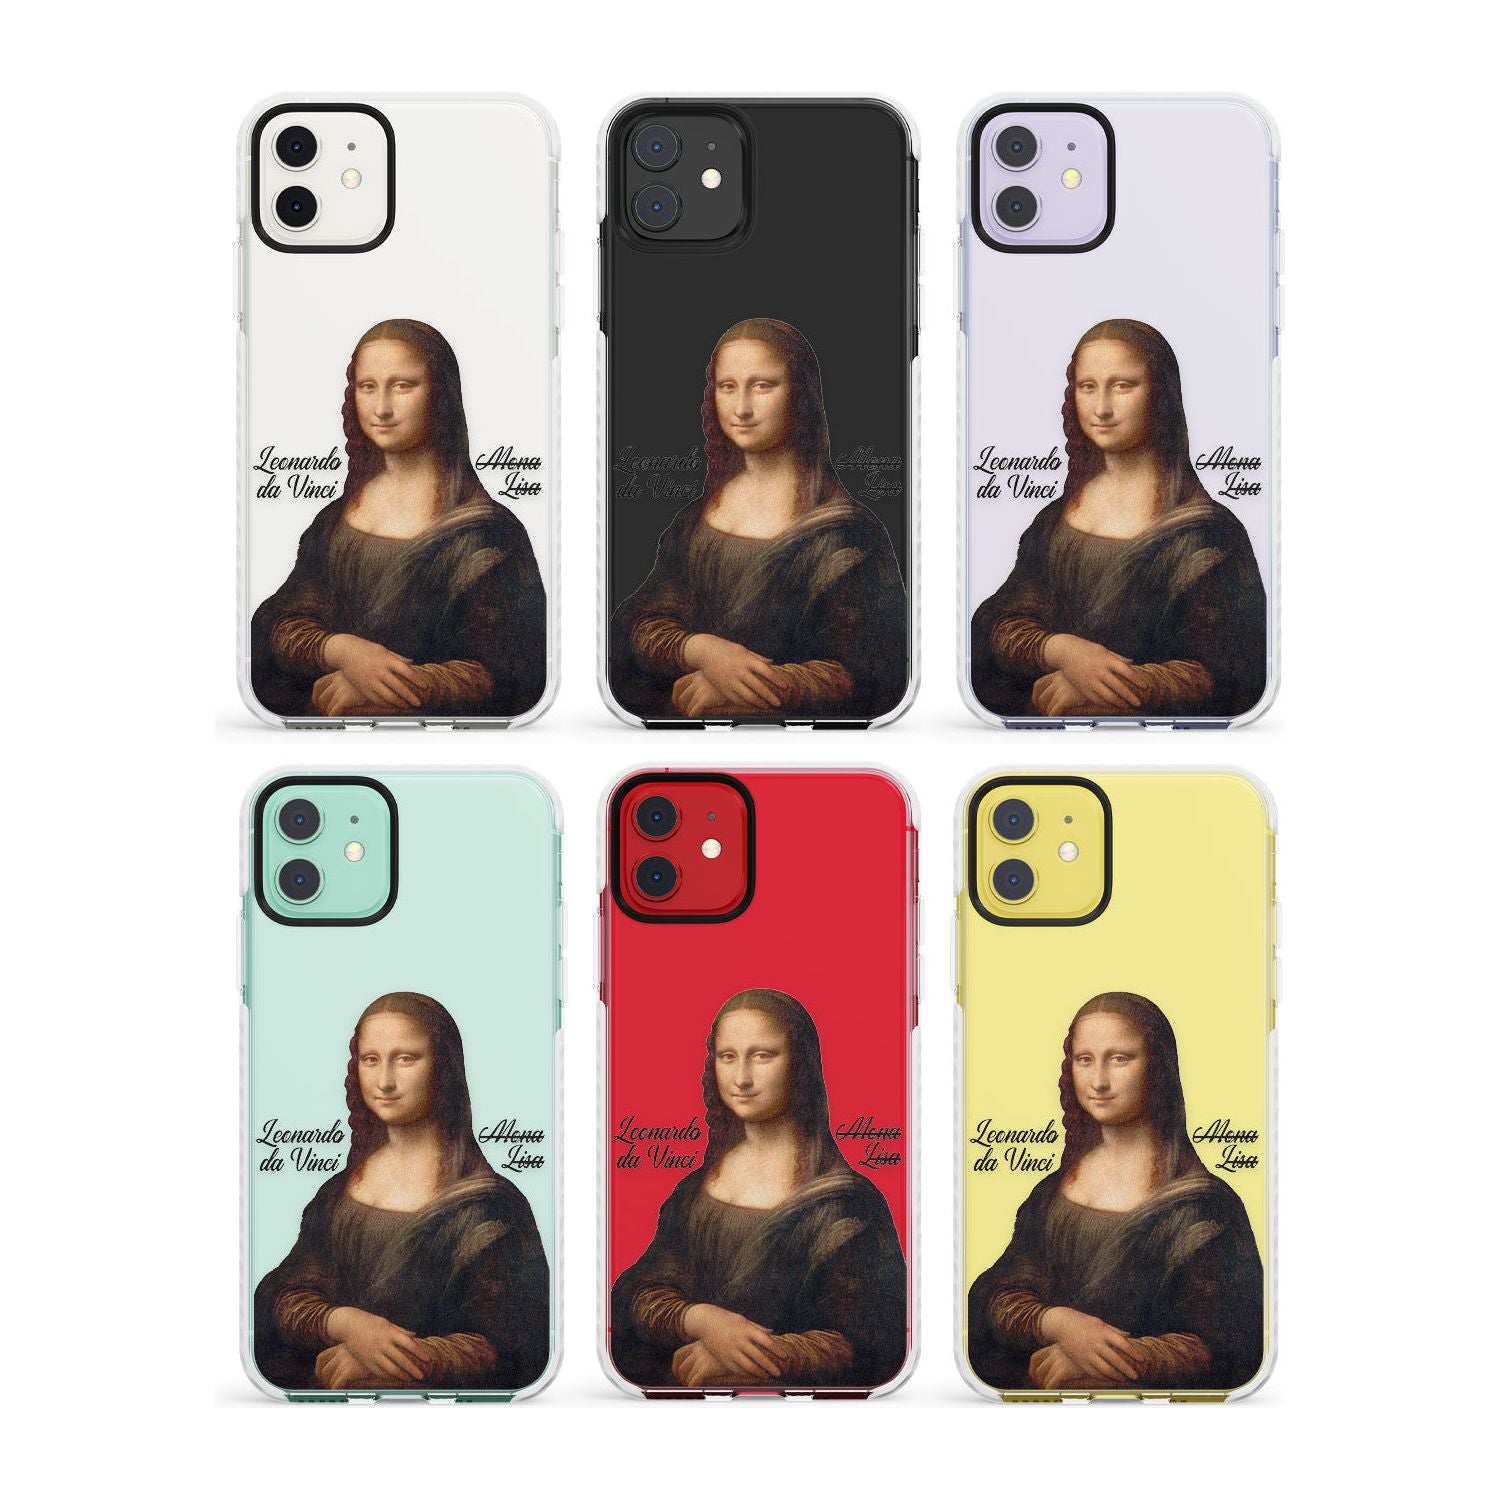 Sidewall Impact Phone Case for iPhone 11, iphone 12